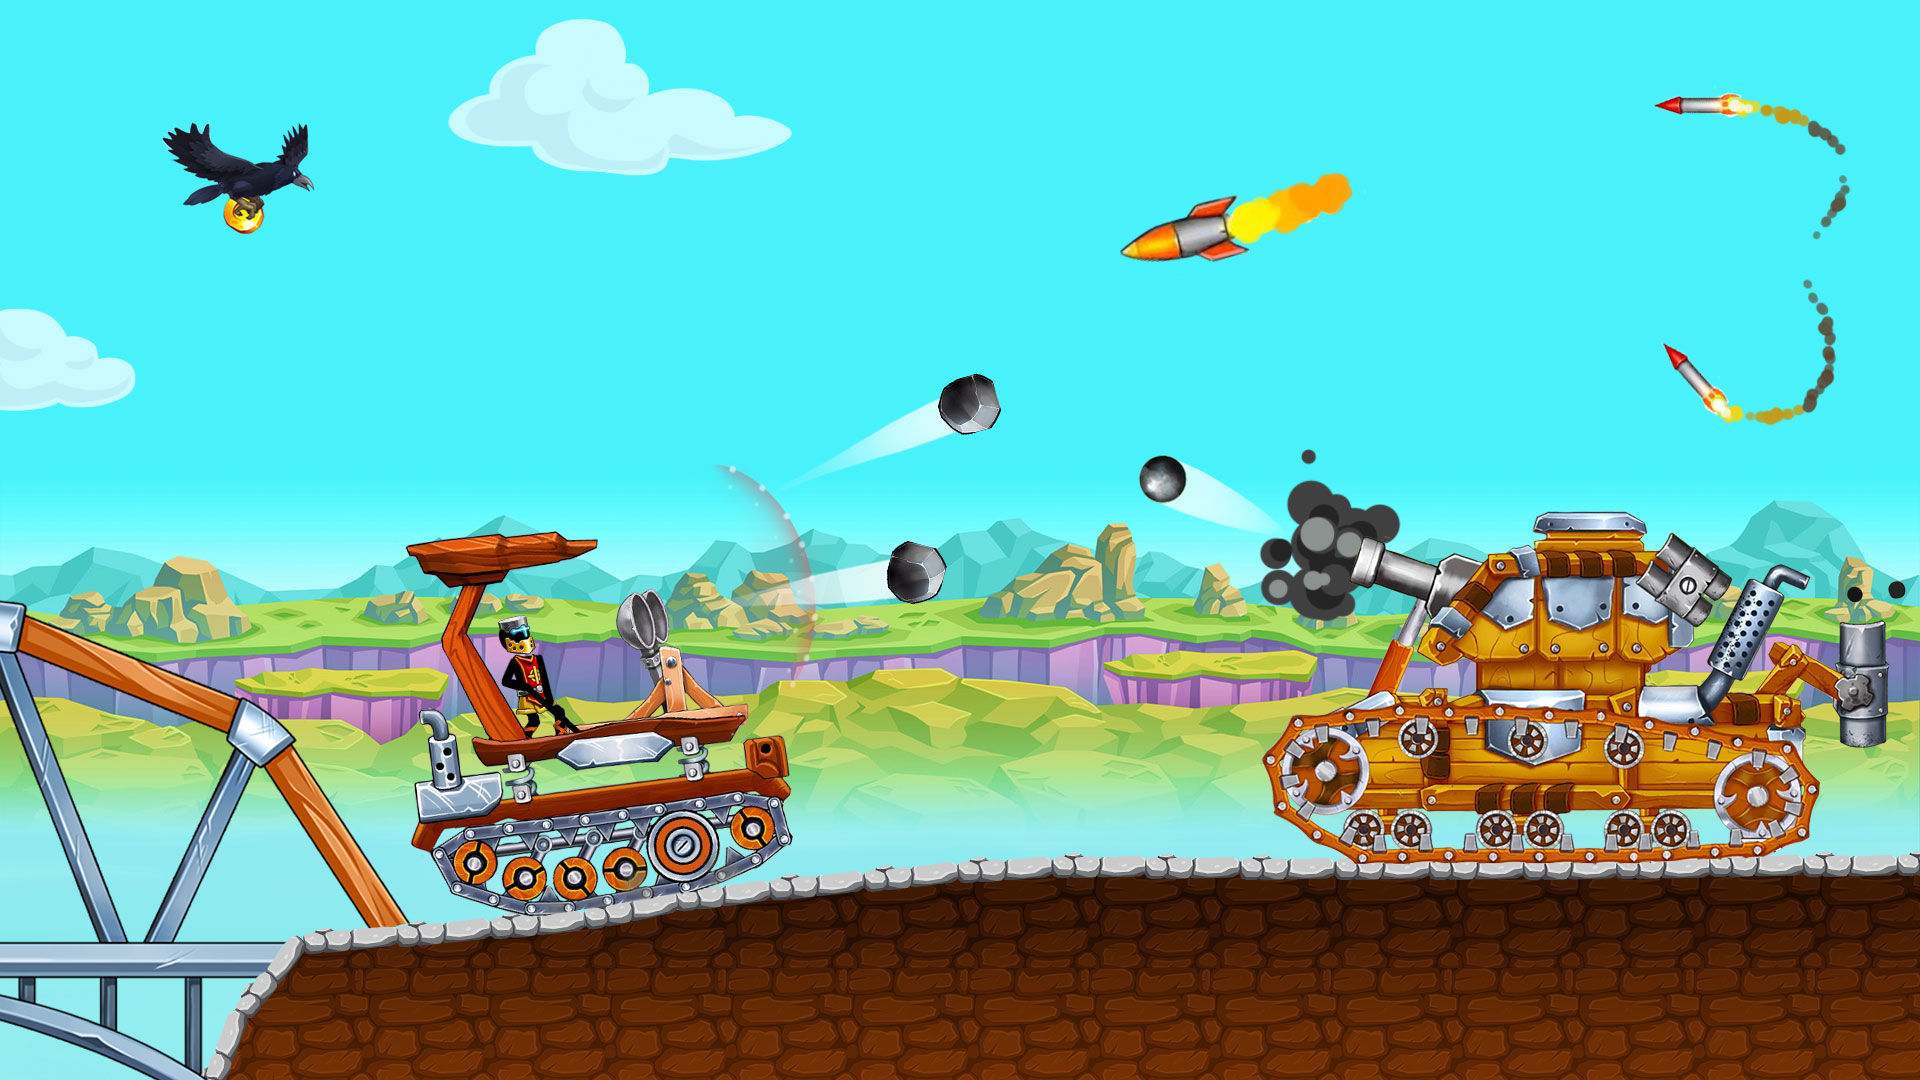 The Tank: Stick pocket hill - Android game screenshots.